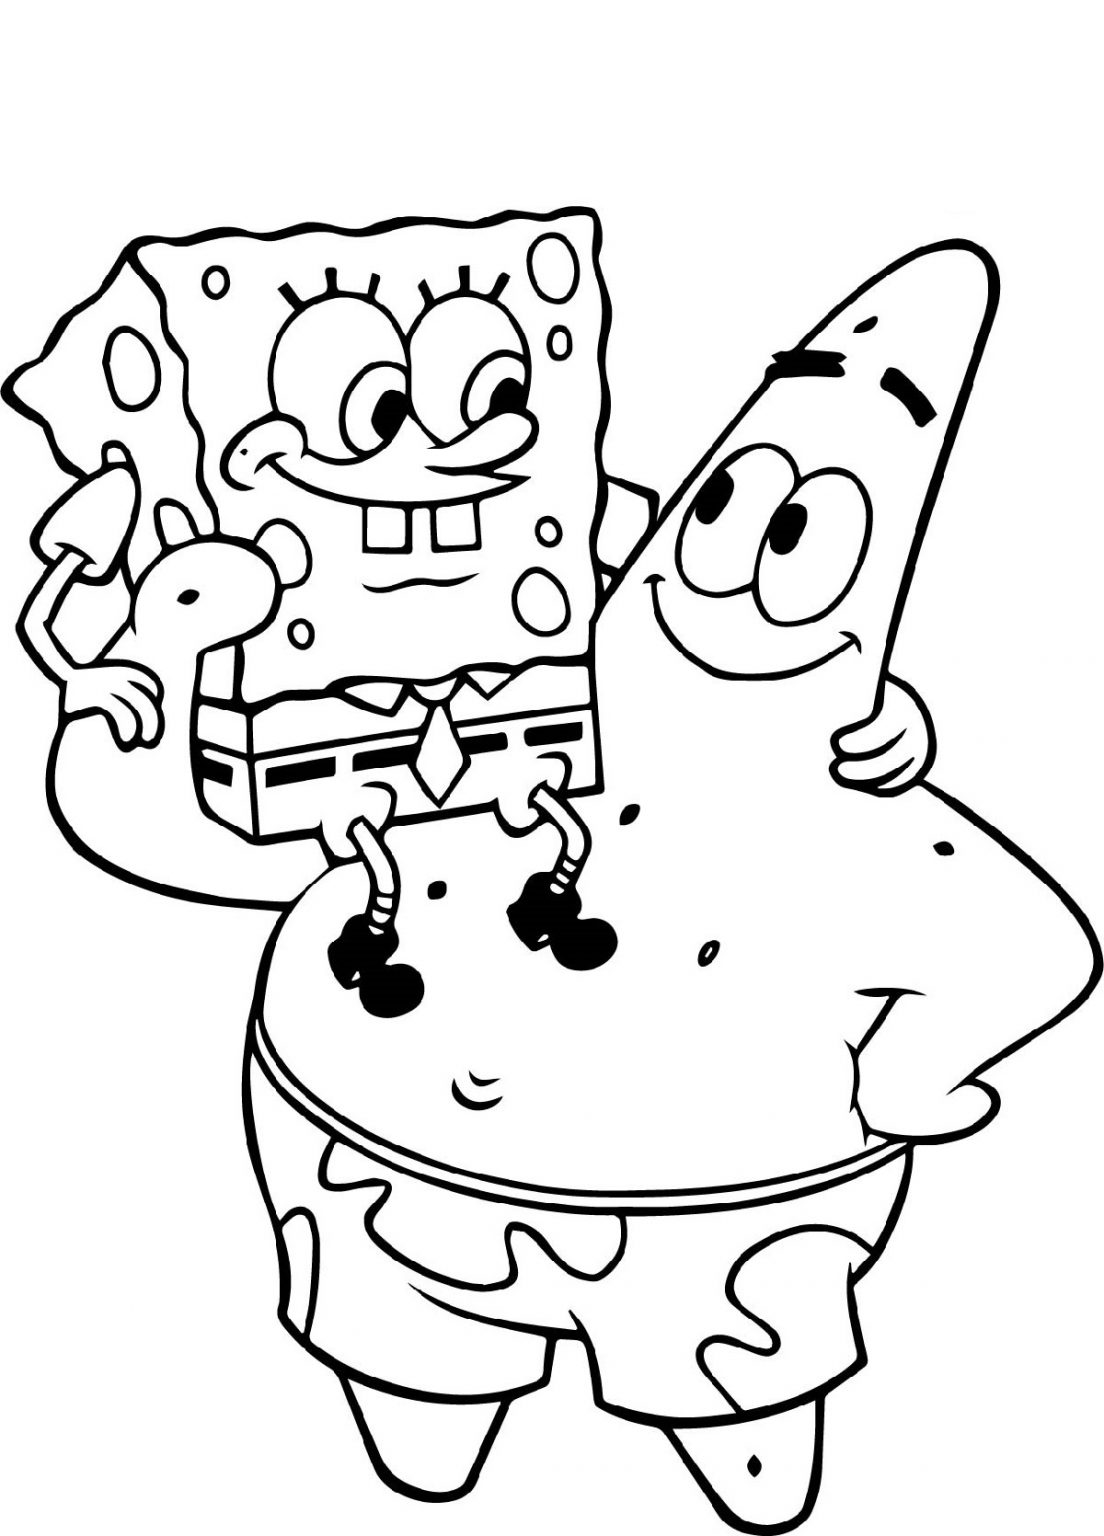 Funny Spongebob Coloring Pages Printables 74